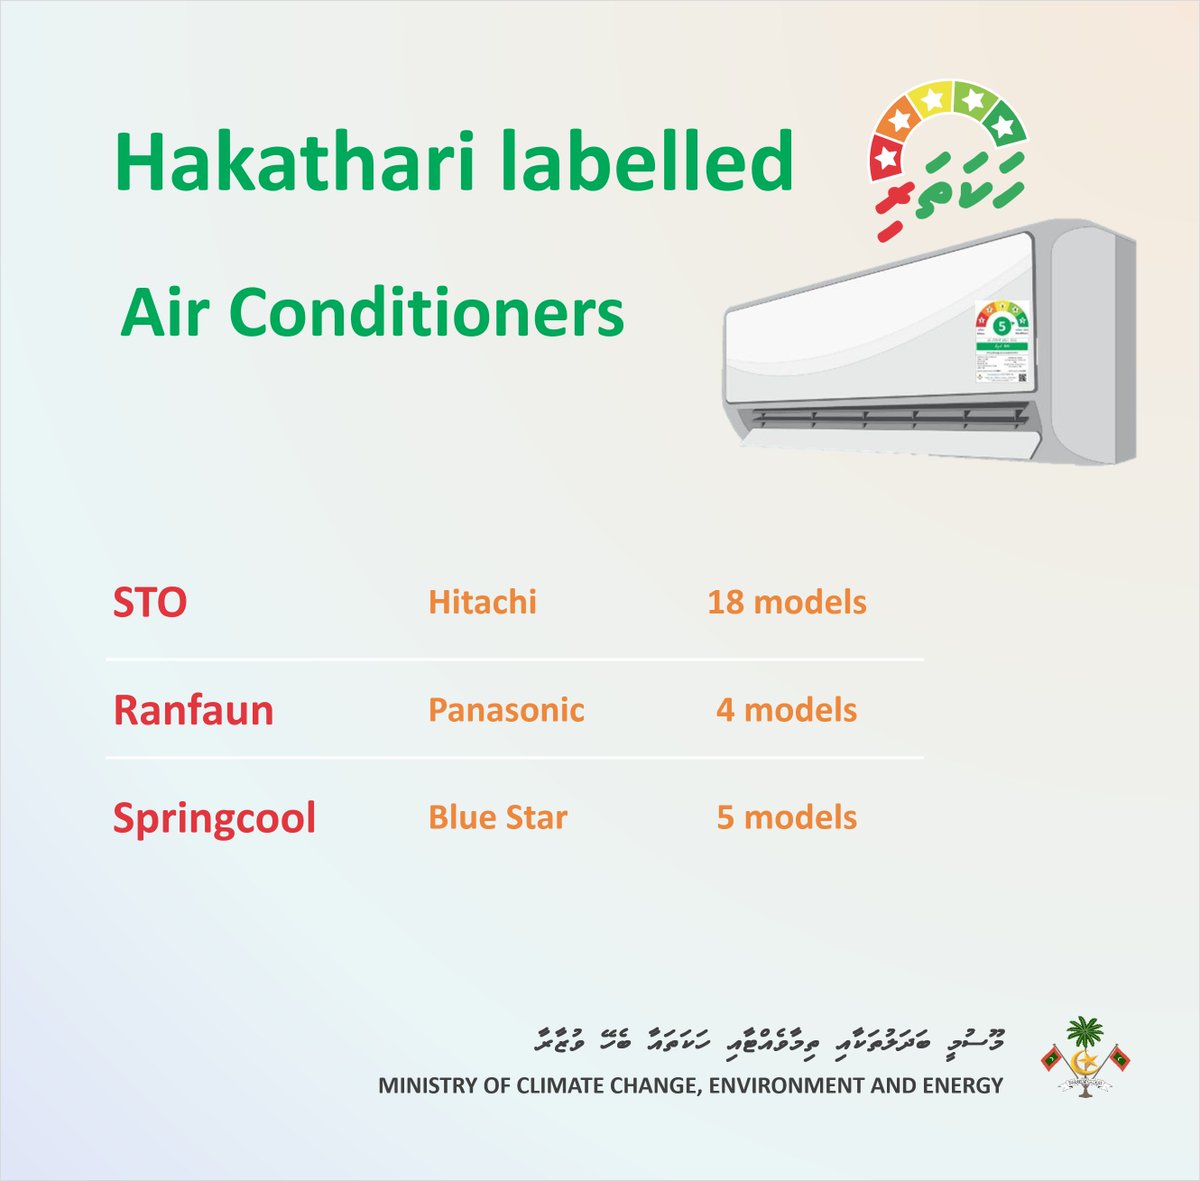 Hakathari labelled Air Conditioners are now available in three outlets. The Hakathari label indicates Energy efficiency level of electrical appliances. For more information about Hakathari program: environment.gov.mv/v2/en/hakathar… #Hakathari #HakathaSamakaara